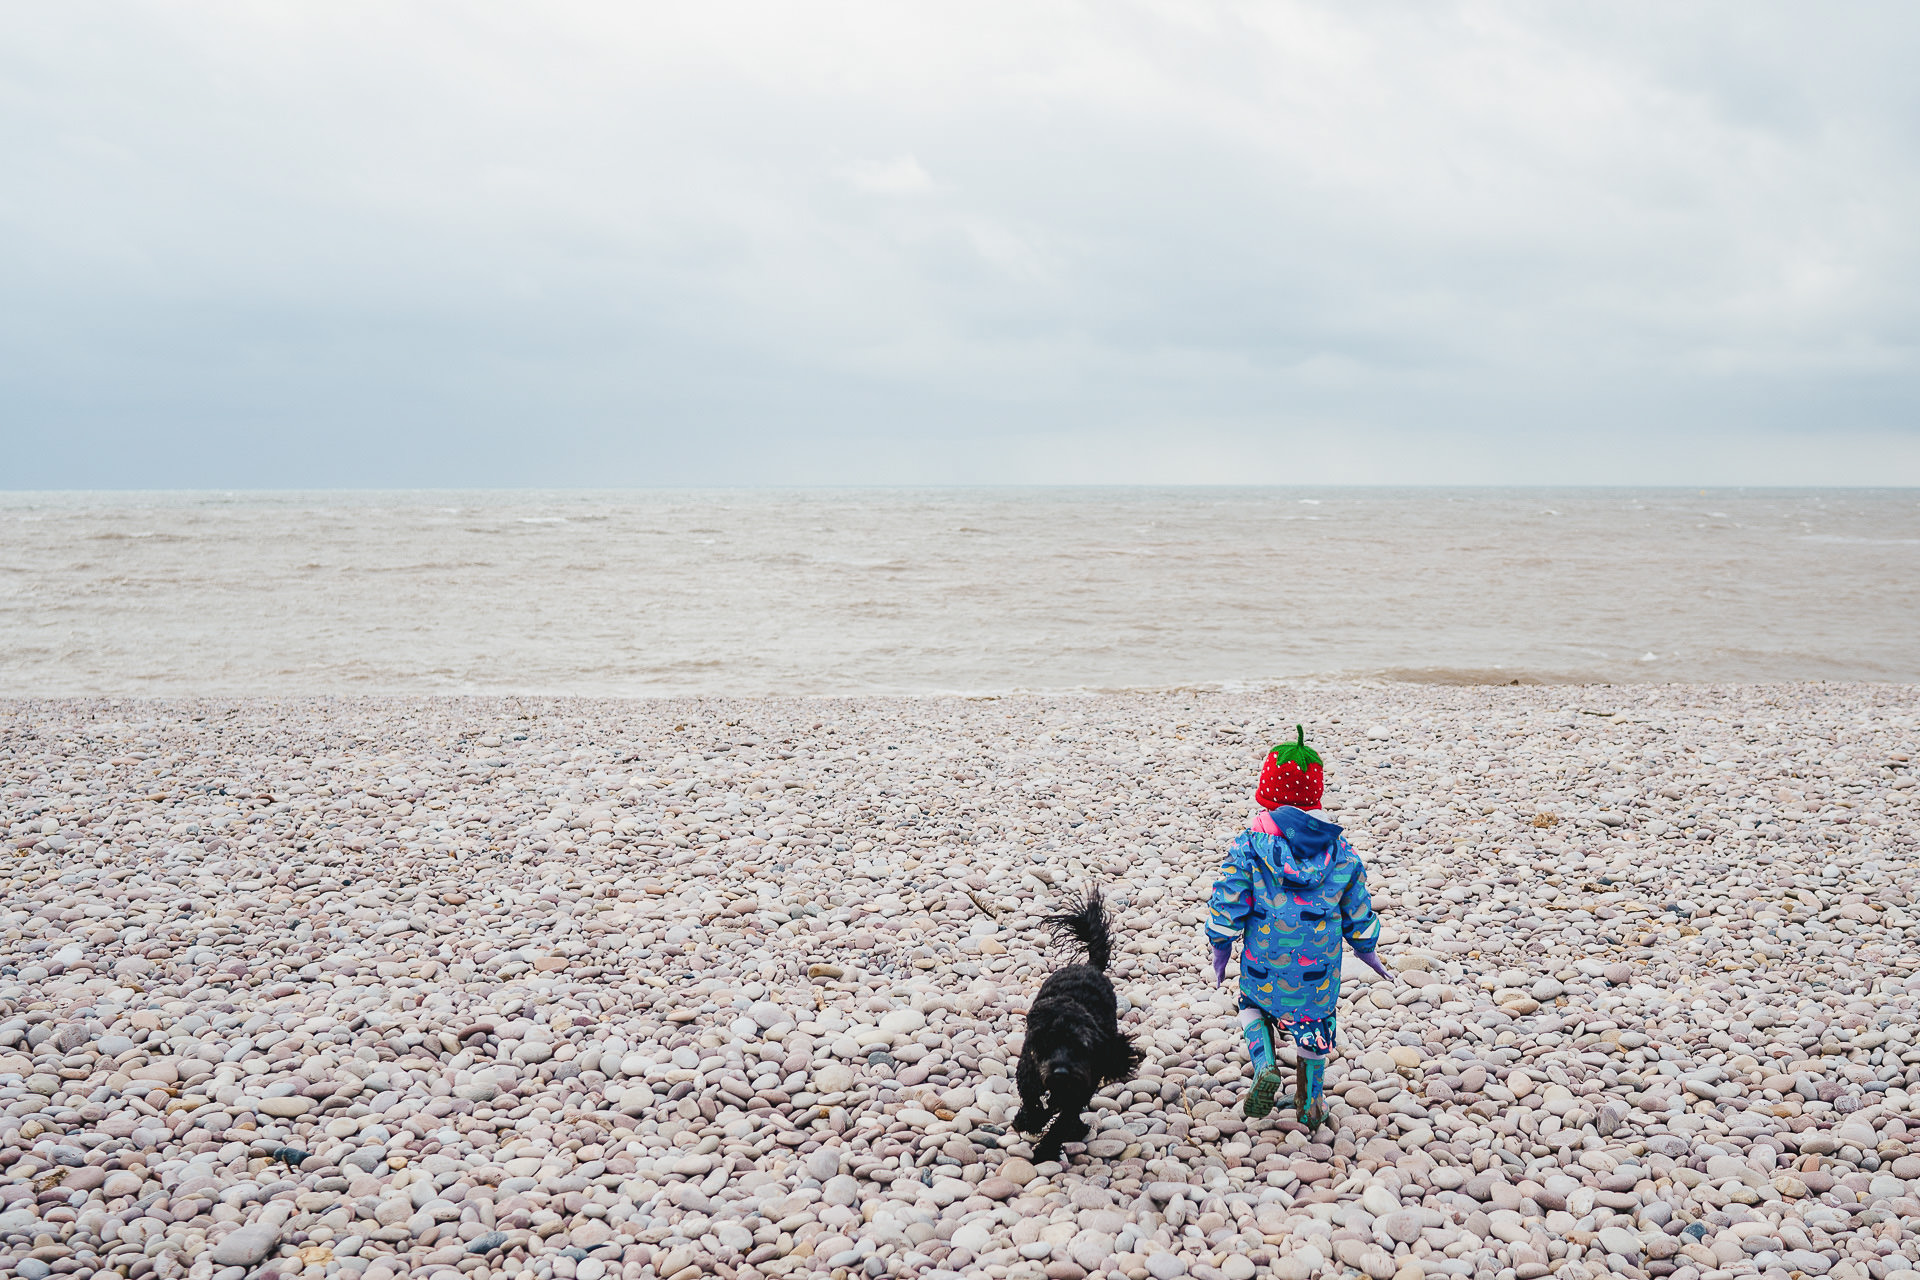 A young child on a pebble beach with a dog